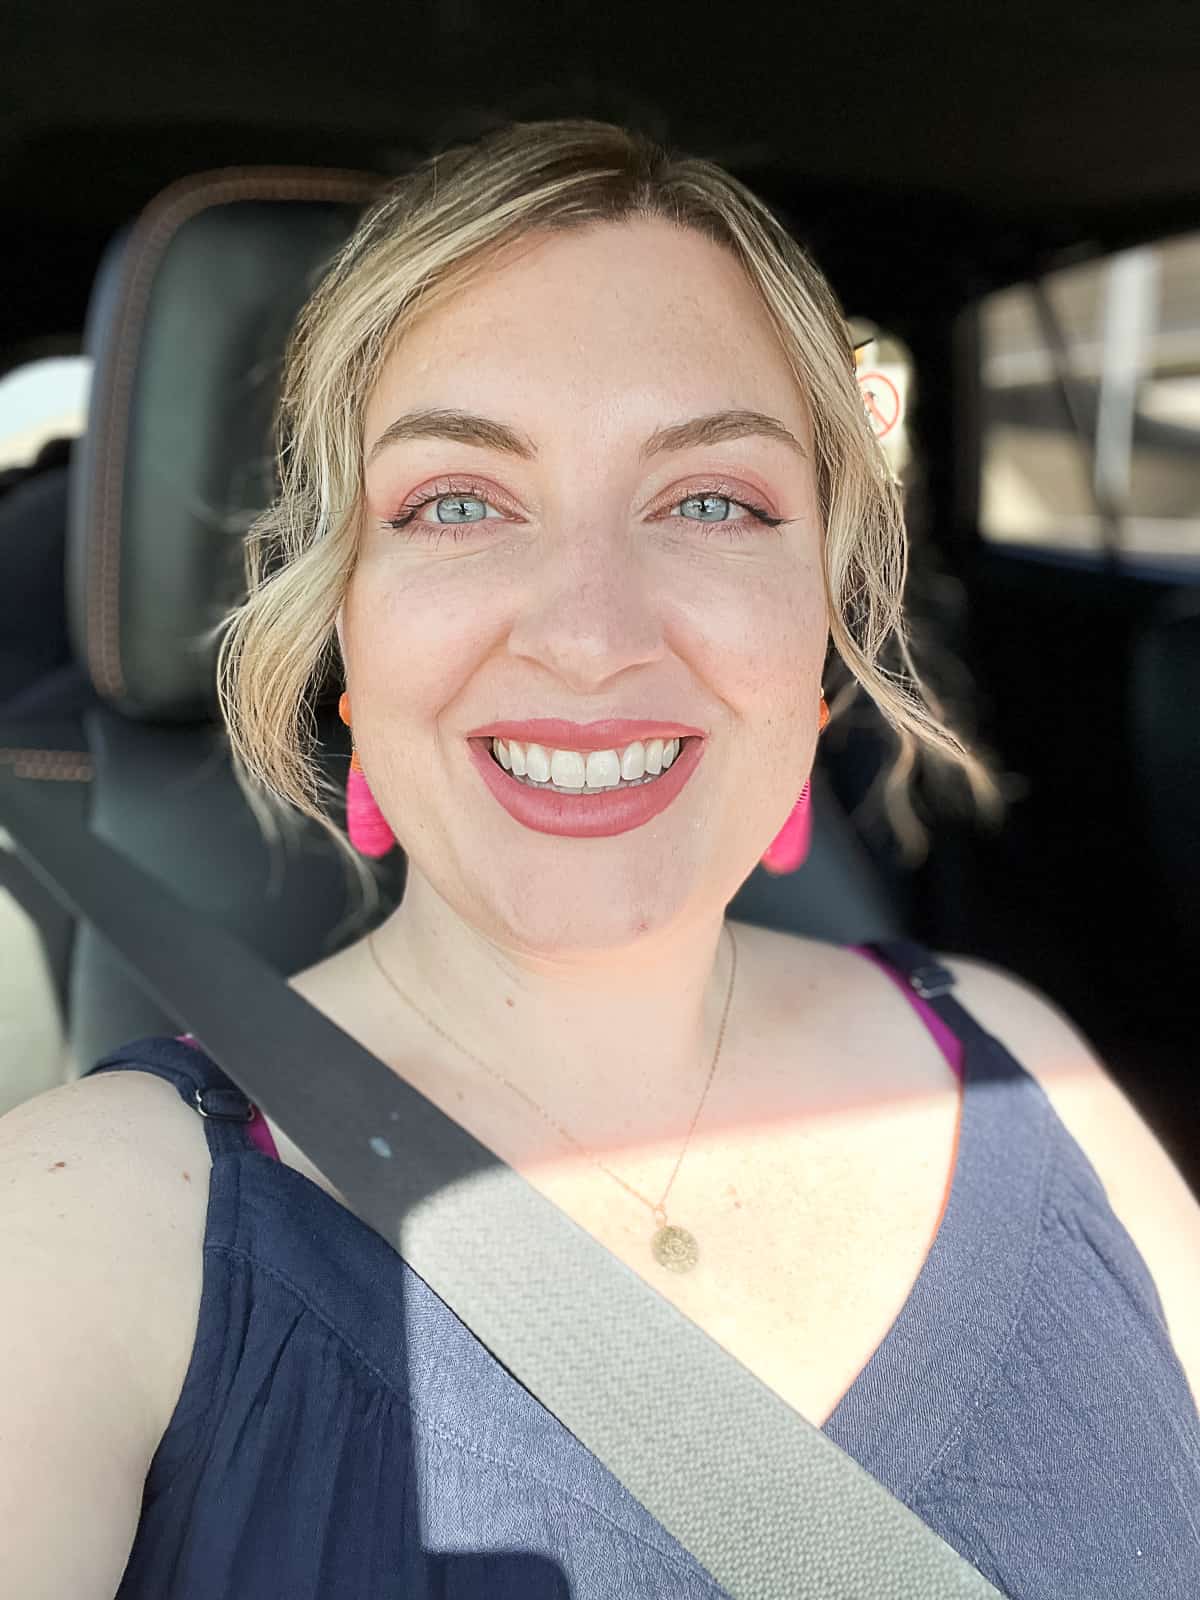 Food Blogger Jenna Passaro Driving to Restaurants To Review In Dallas Texas Area